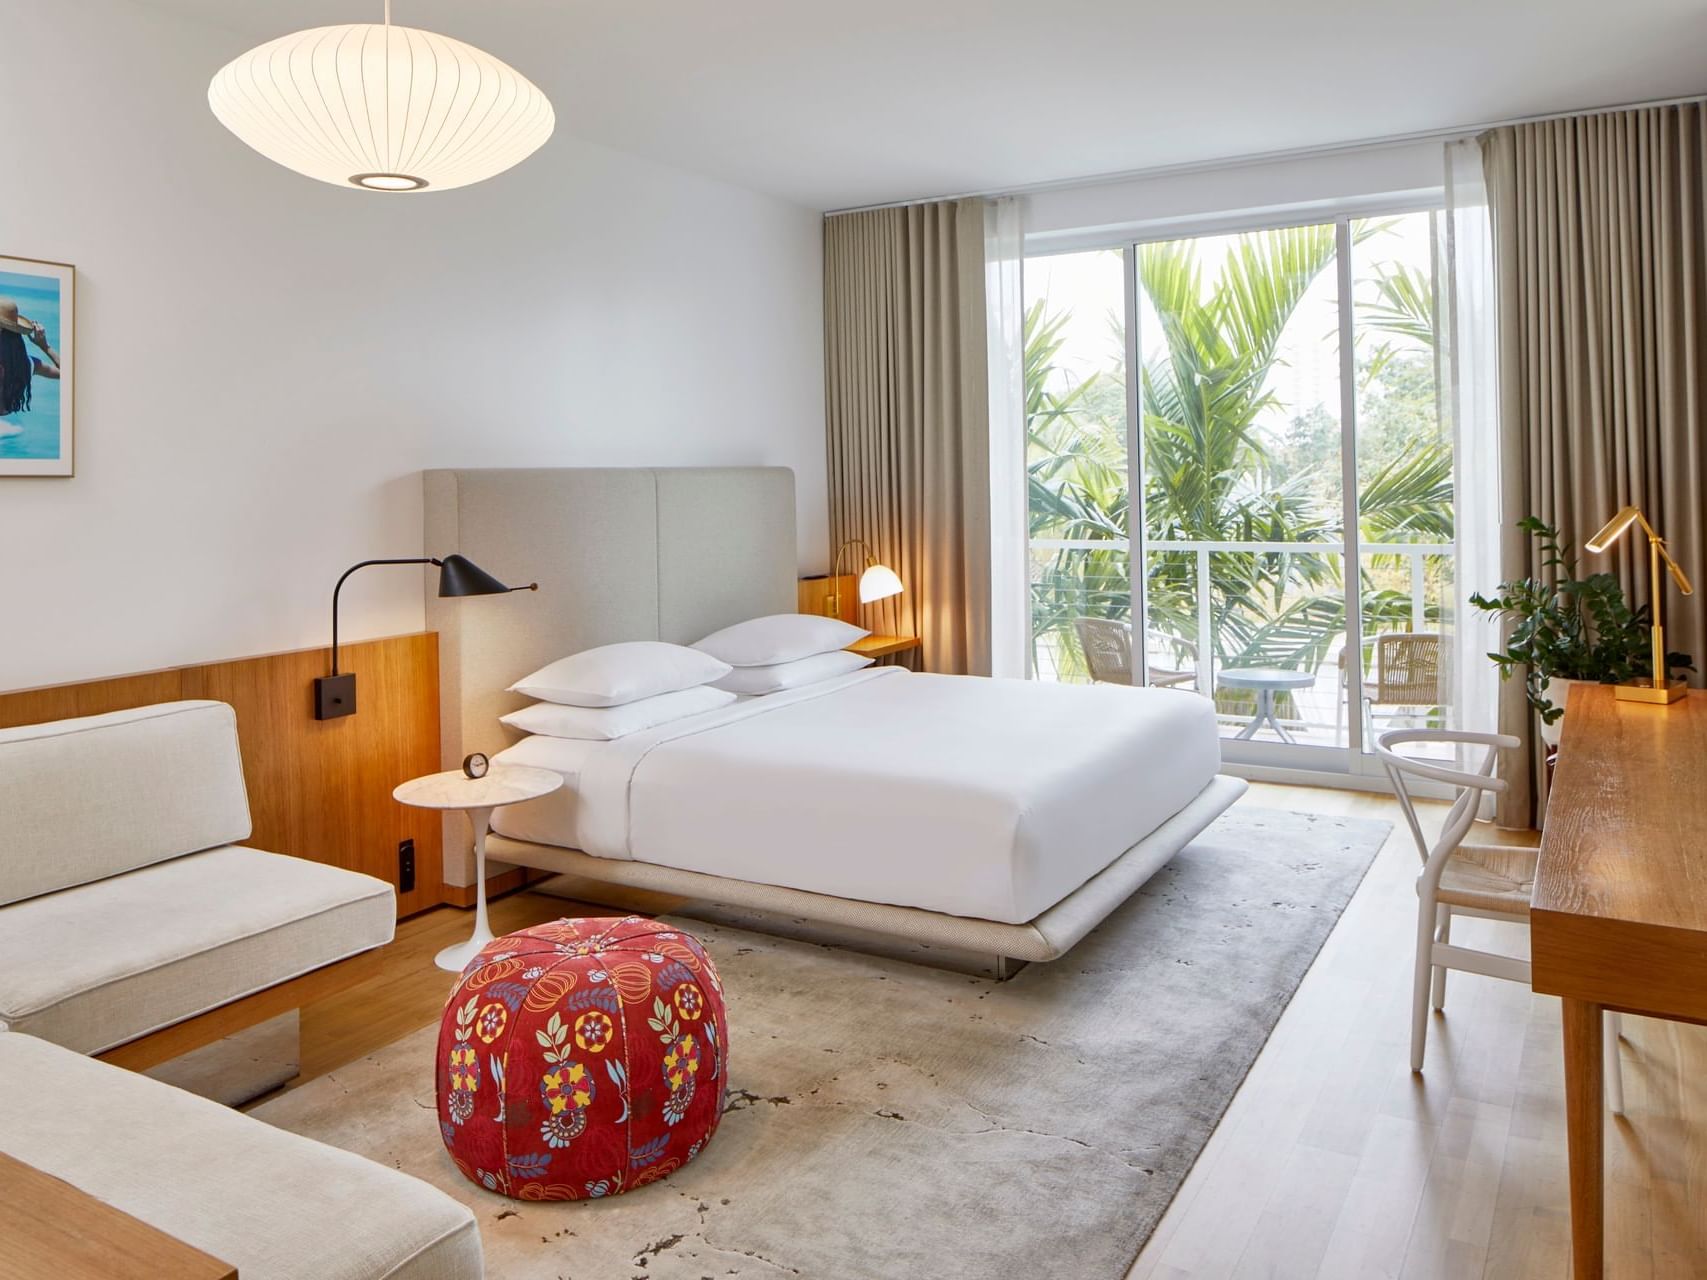 The Deluxe Guest Room with a Balcony at The Sarasota Modern